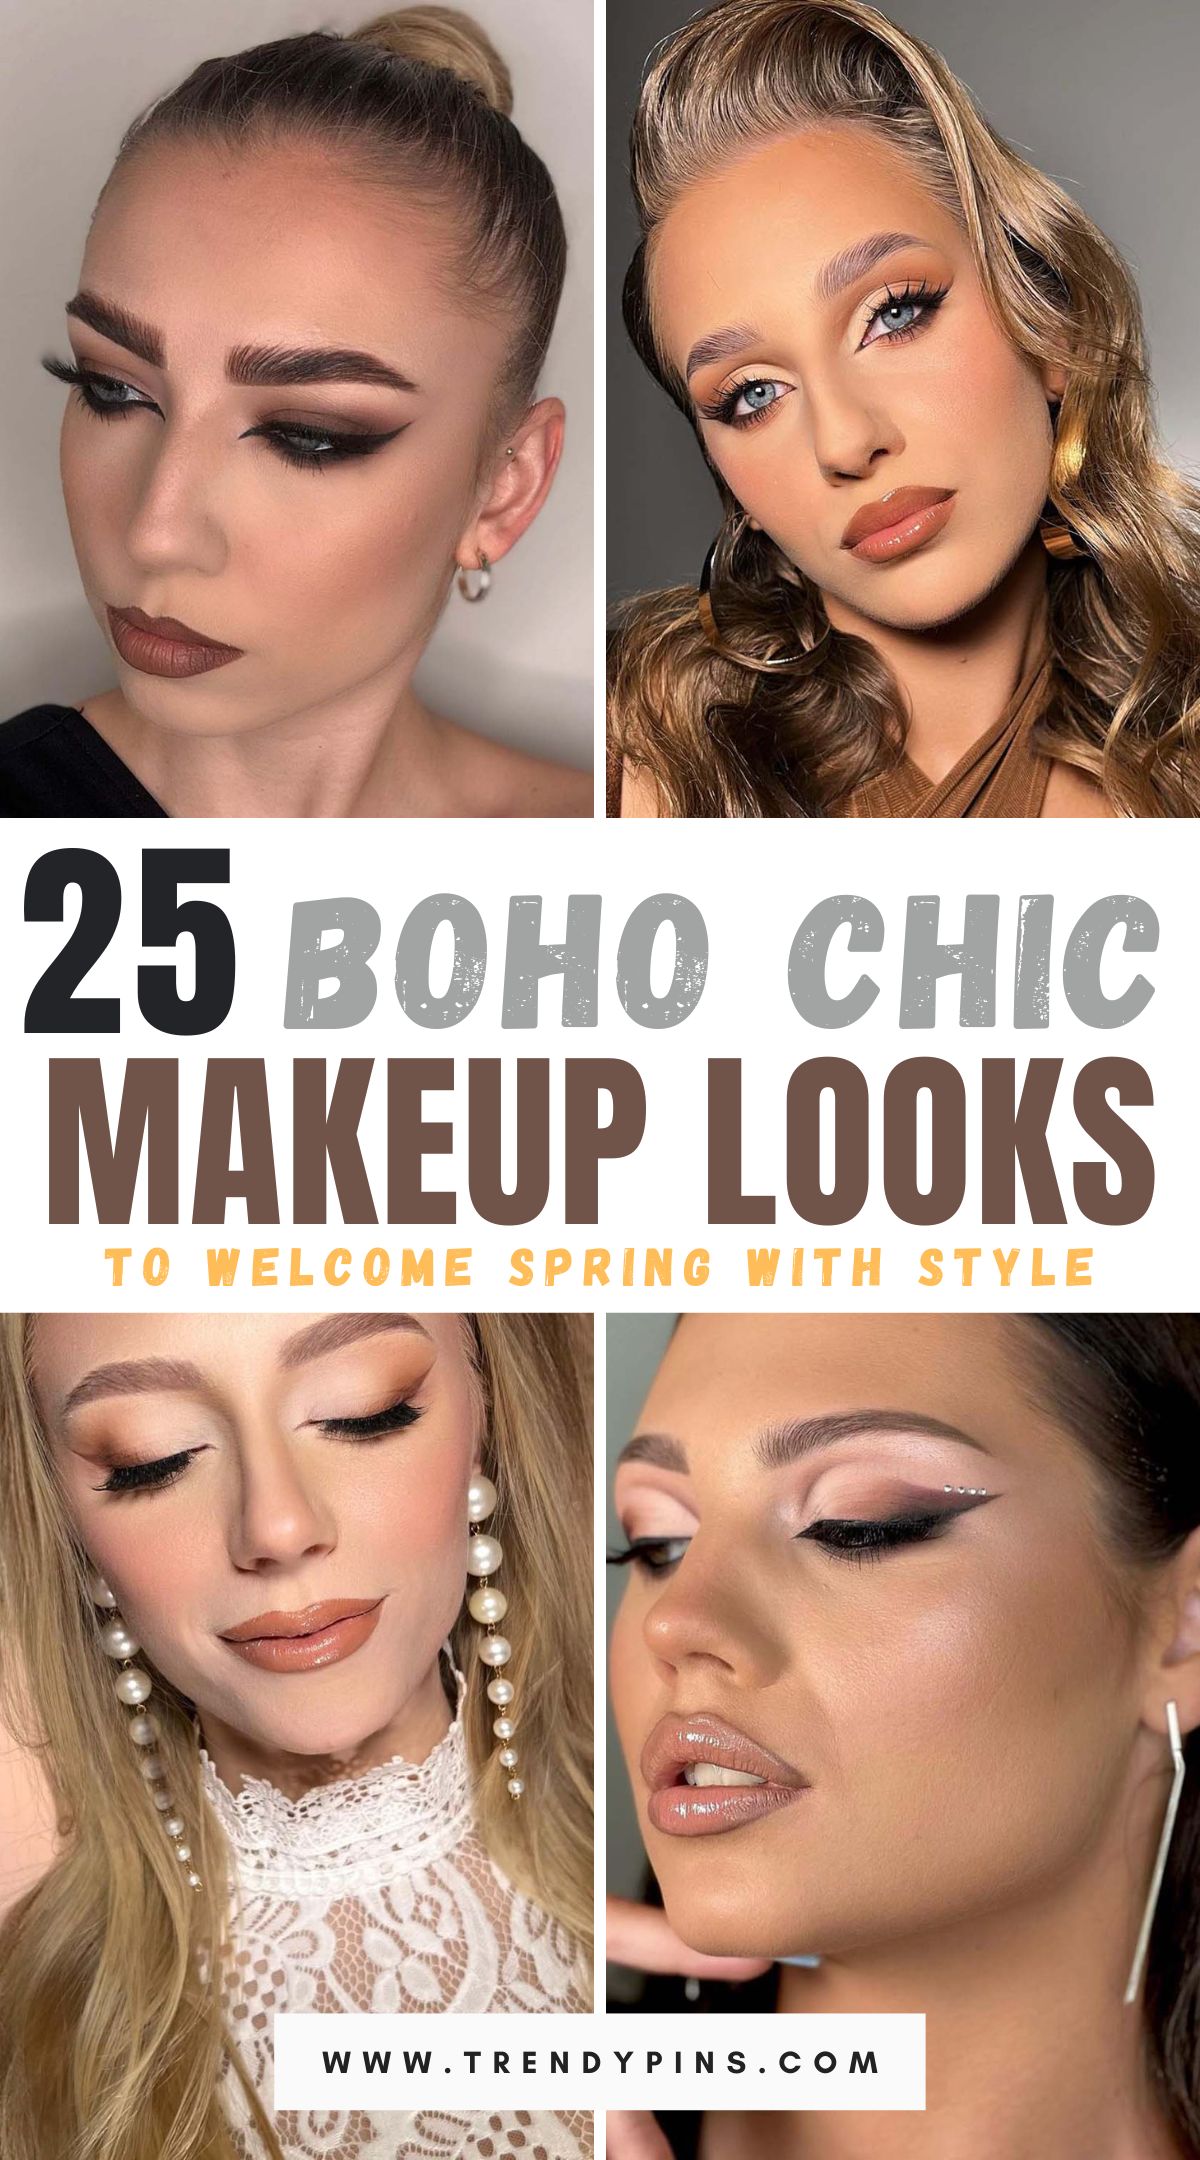 Embrace the spirit of spring with these 25 boho chic makeup ideas. From earthy tones to playful accents, explore creative and free-spirited looks that capture the essence of bohemian style and add a touch of whimsy to your beauty routine.